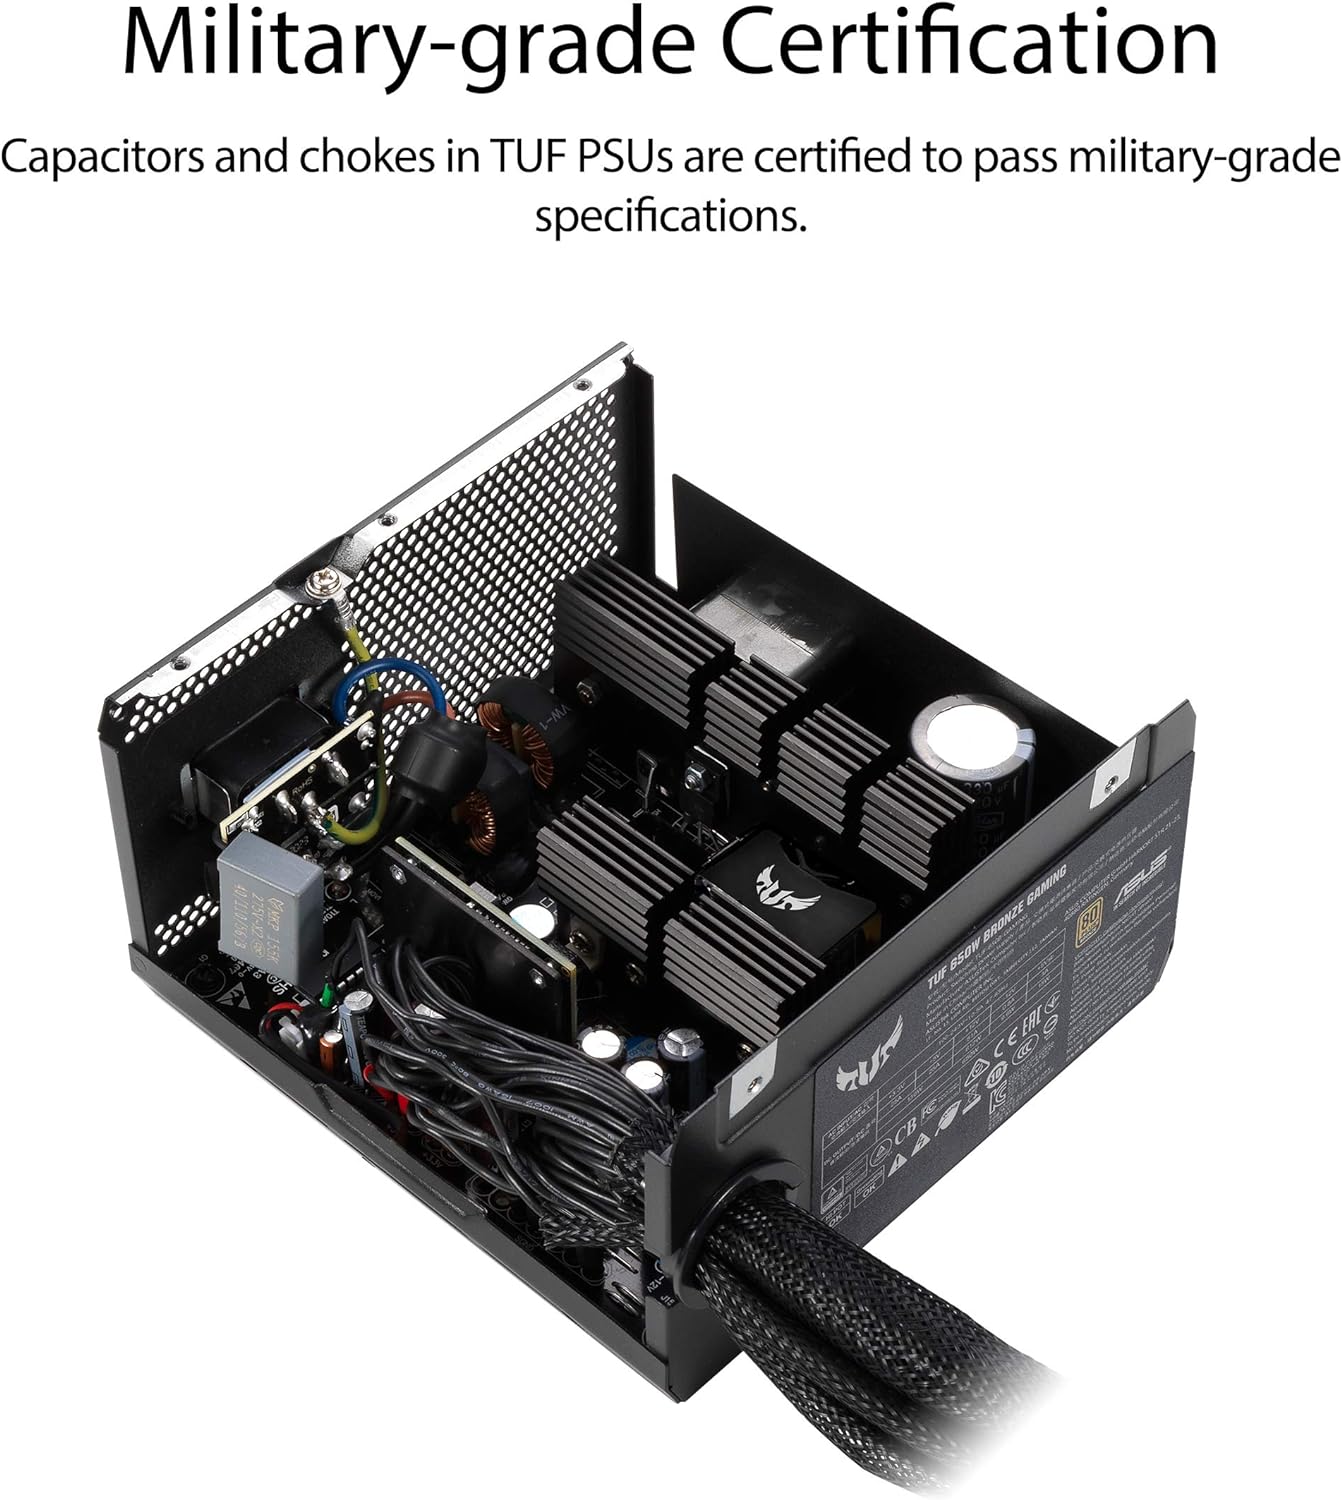 Reliable ASUS TUF GAMING 650W PSU - 0dB Technology, 80 PLUS Bronze, 80cm 8-pin CPU Connector 0192876724224